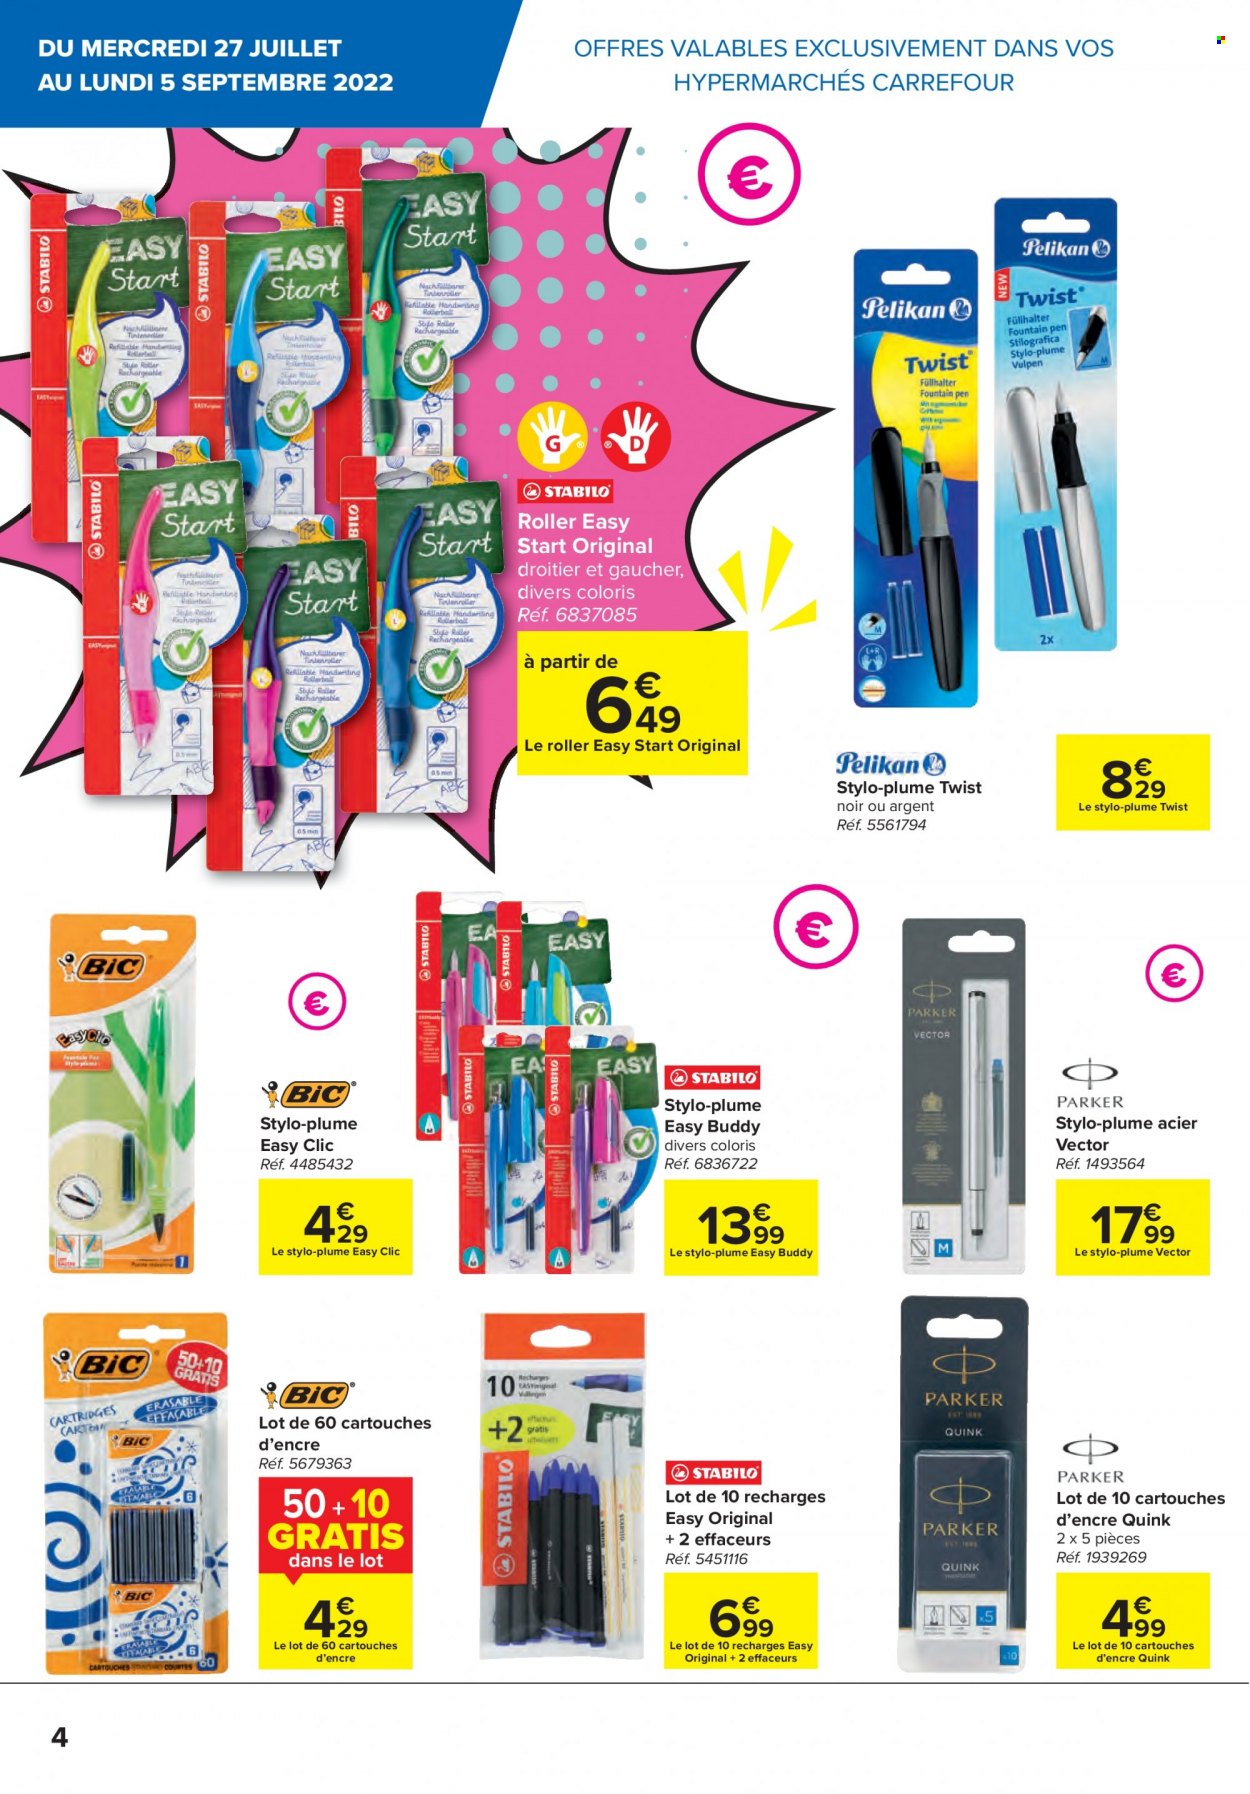 Catalogue Carrefour hypermarkt - 27.7.2022 - 5.9.2022. Page 4.